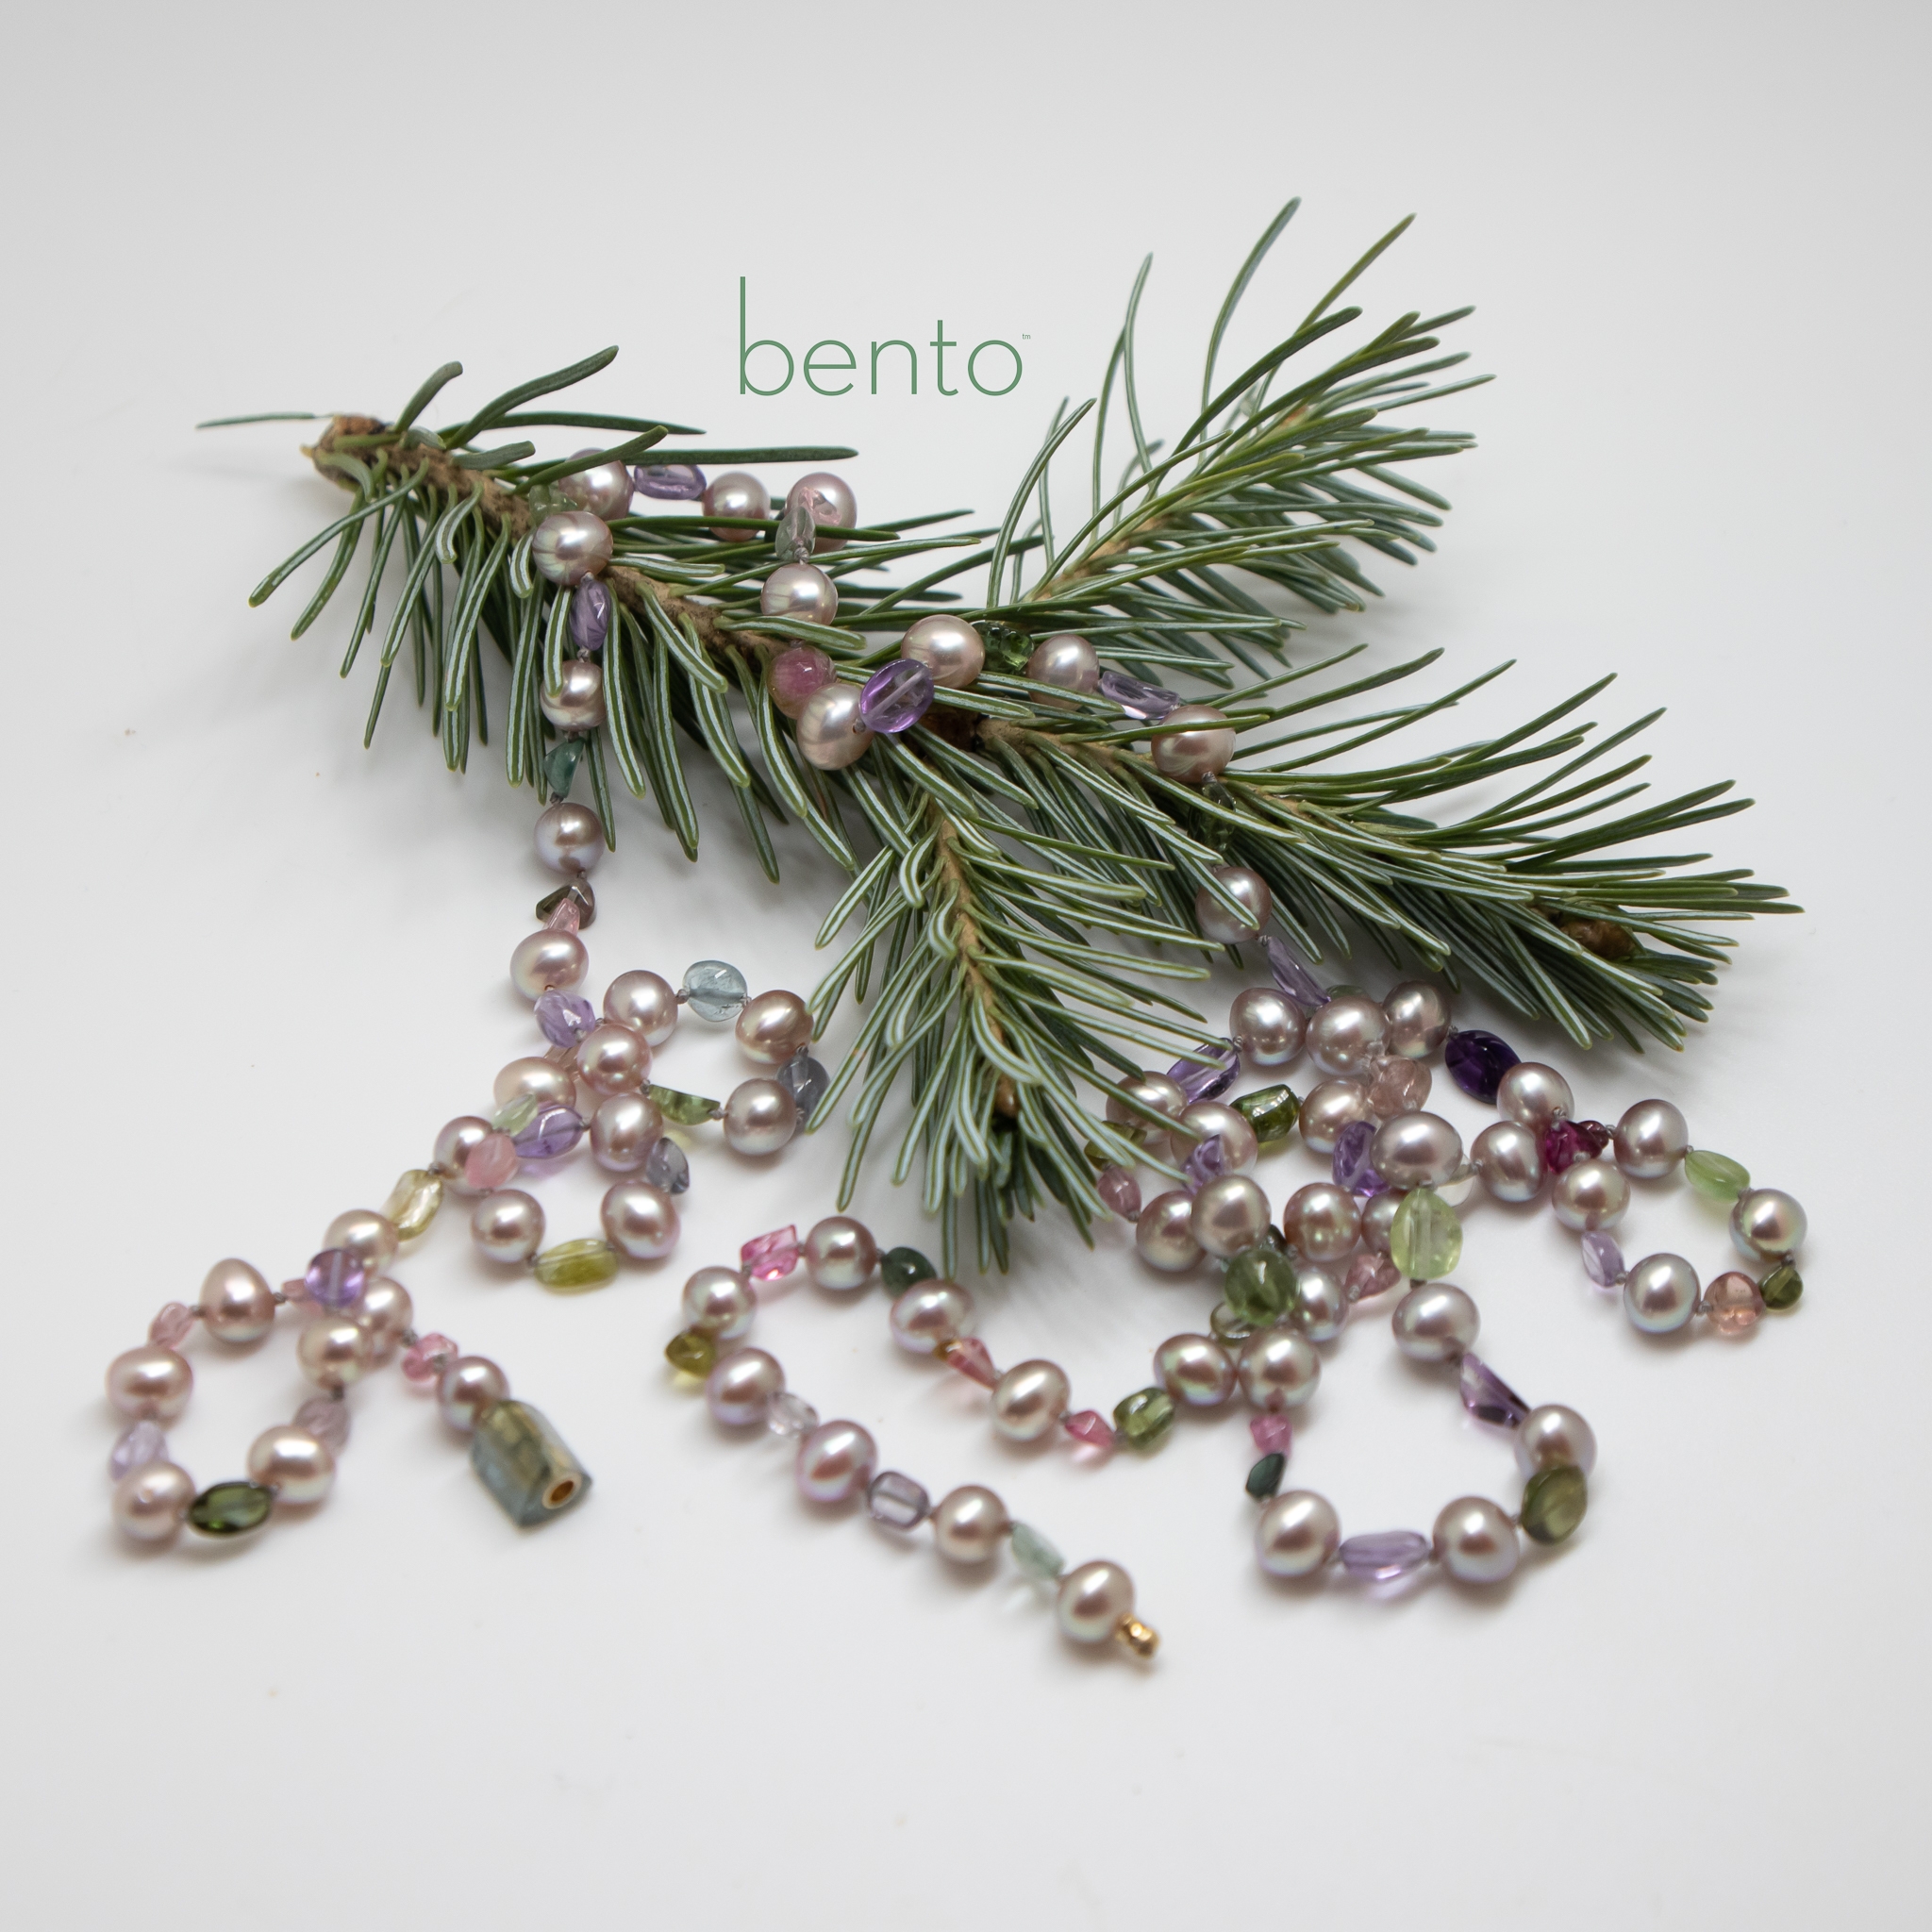 Pretty freshwater pearl and tourmaline cabochon bead necklace photographed on a sprig of Spruce